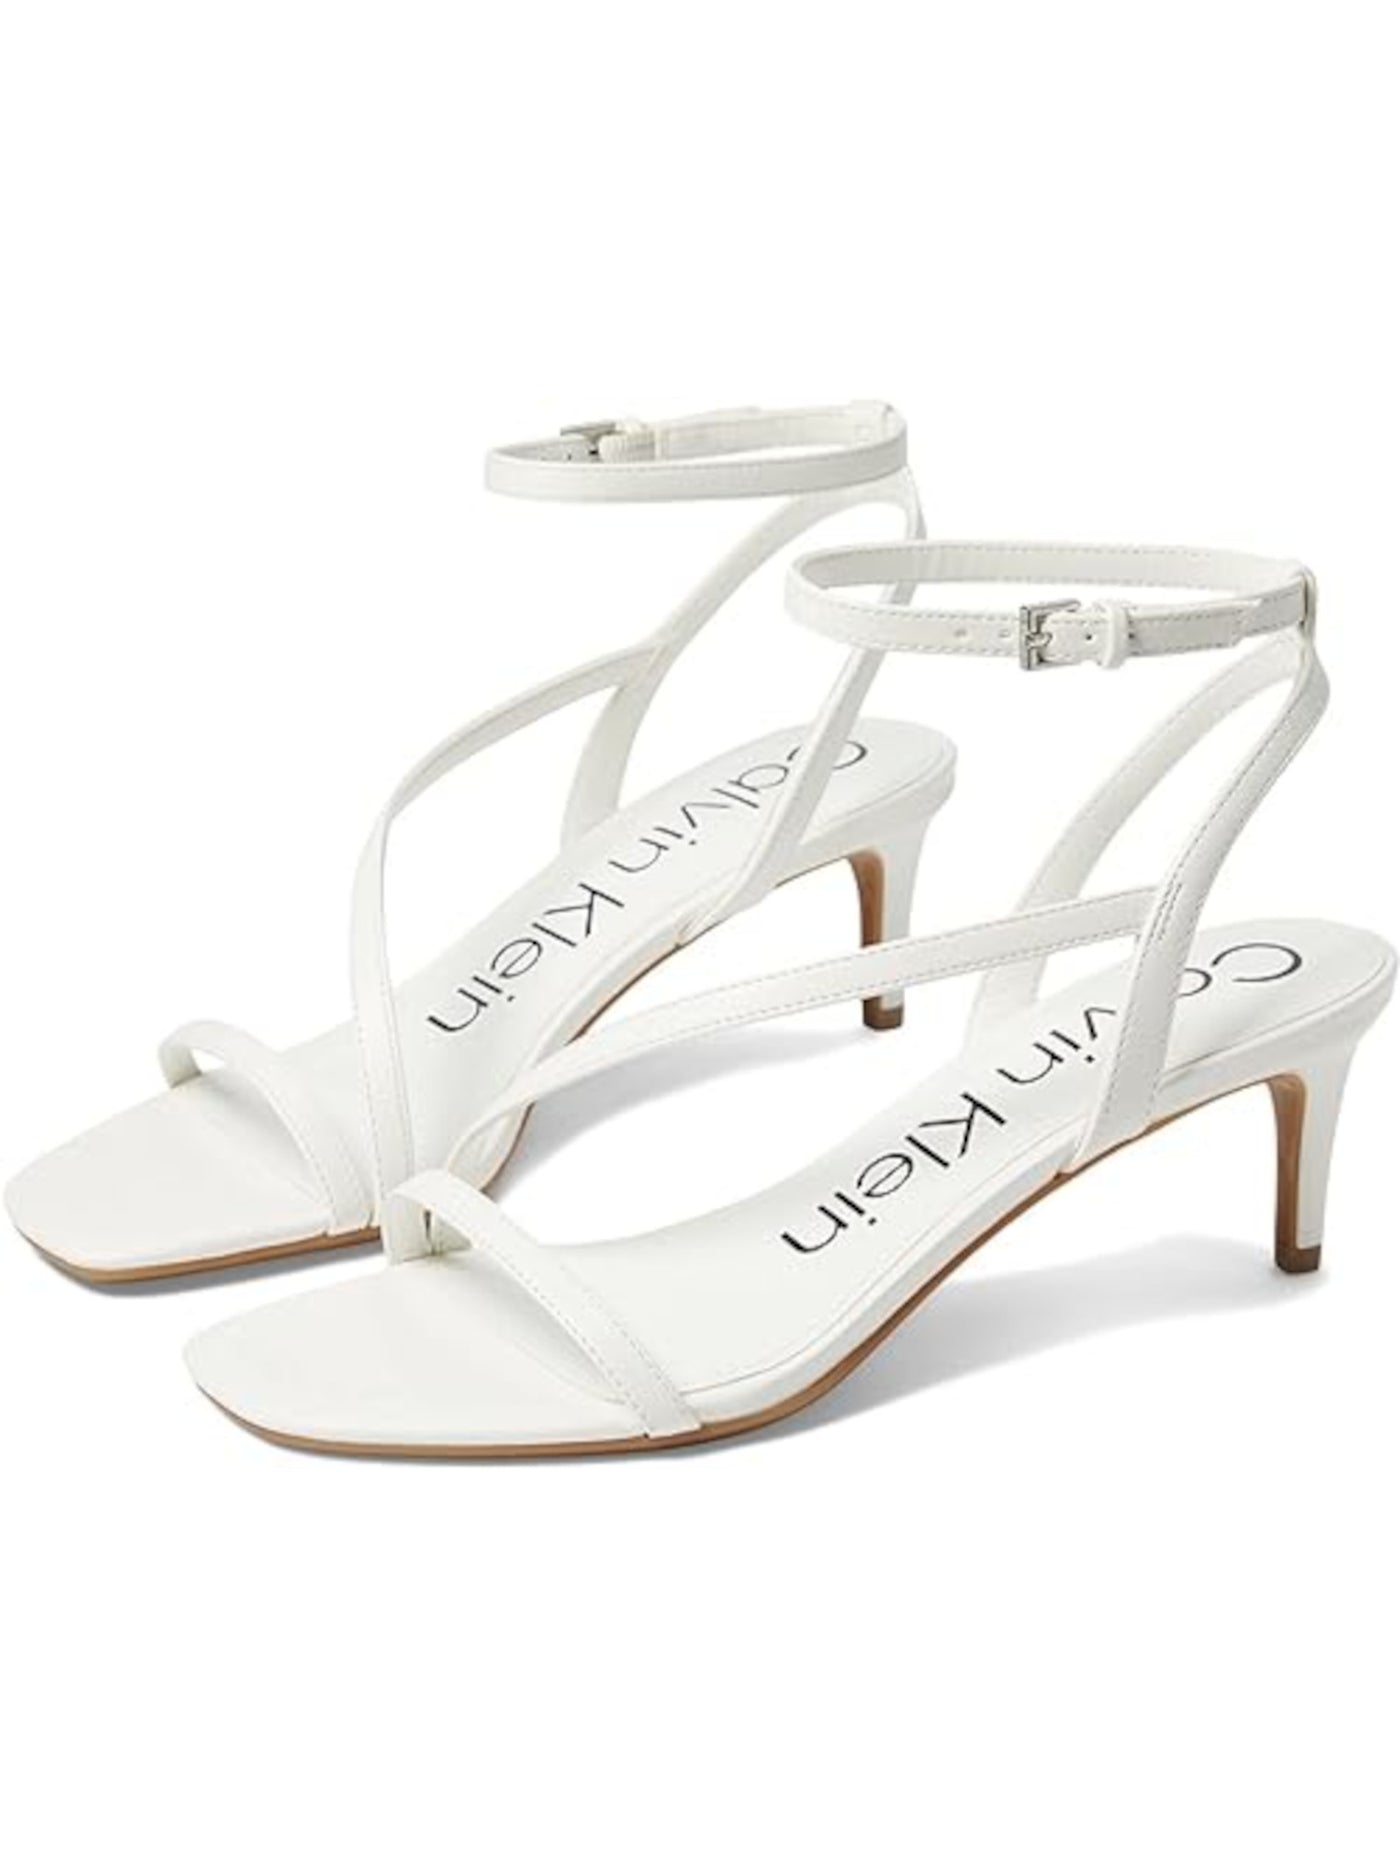 CALVIN KLEIN Womens White Ankle Strap Cushioned Iryna Square Toe Kitten Heel Buckle Heeled Sandal 9.5 M